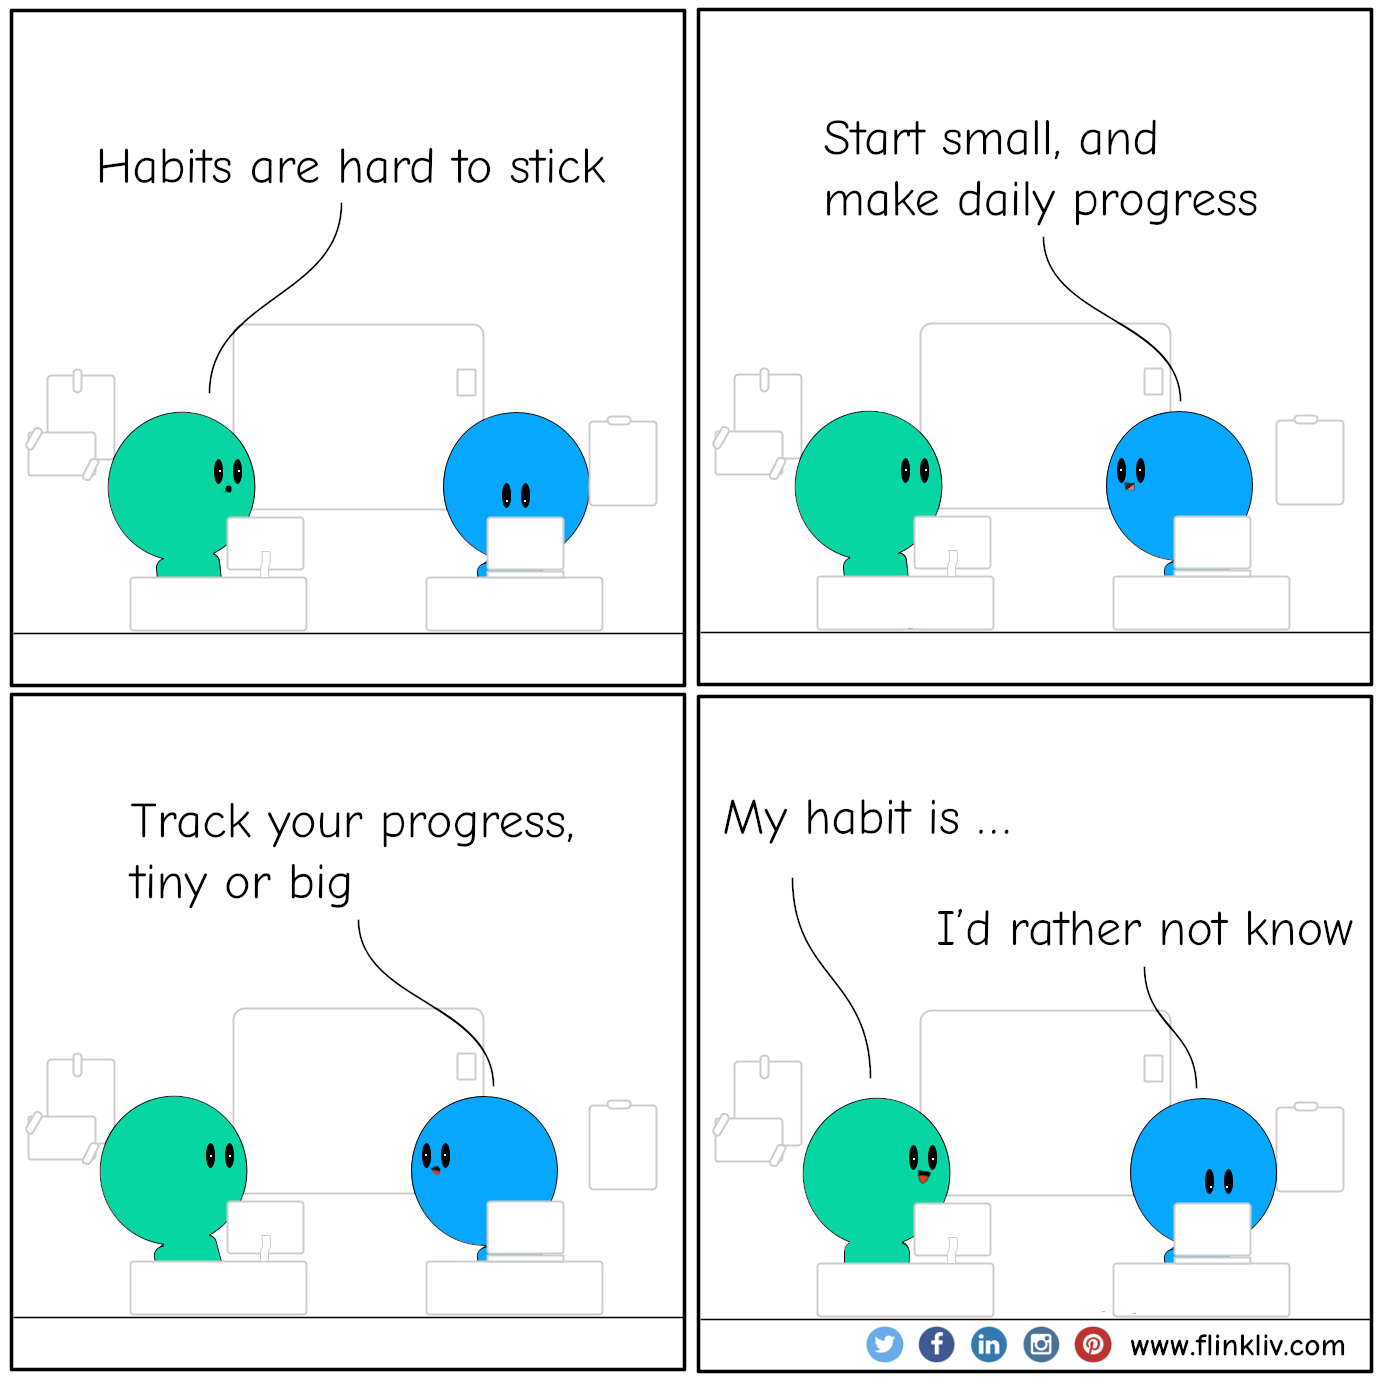 A conversation between A and B about how to make habits stcik
				A: Habits are hard to stick.
				B: Start small, and make daily progress.
				B: Track your progress, tiny or big.
				A: My habit is ...
				B: I’d rather not know.
              